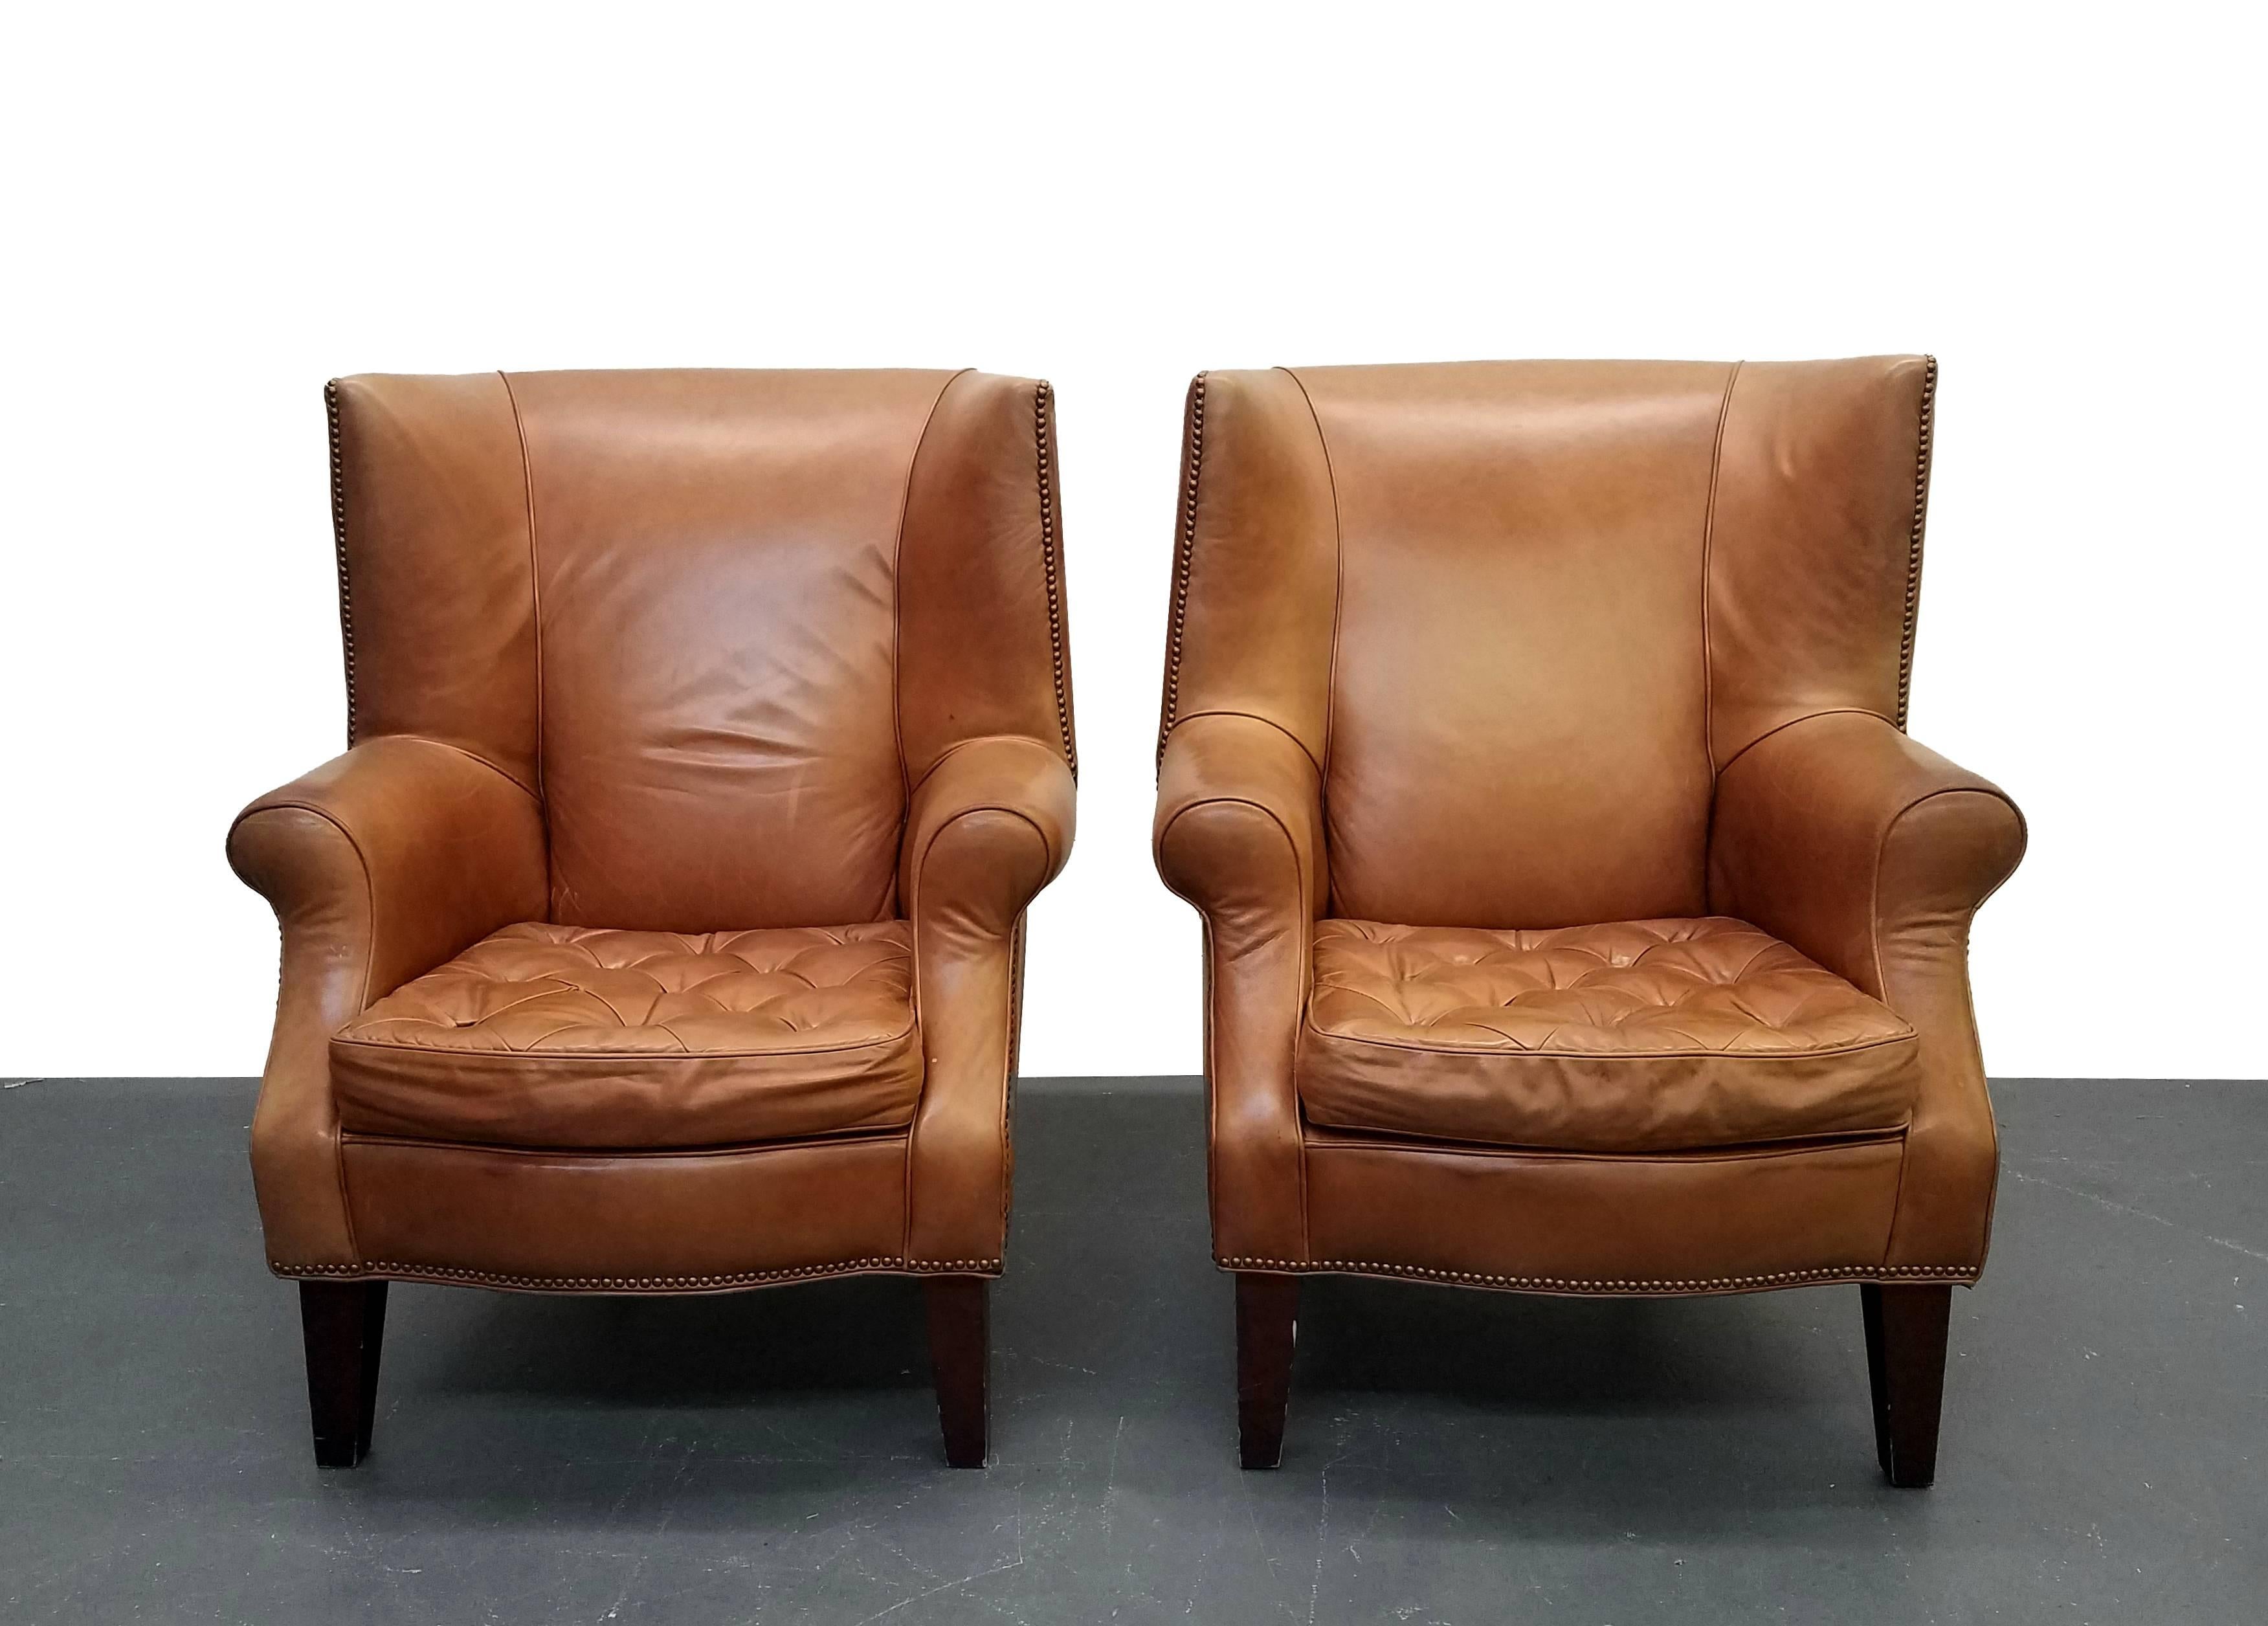 This is a great pair of large vintage worn leather wingback chairs. Perfect for a library, man cave or cigar bar. These beasts ooze, manly. They are oversized and comfortable with the perfect patina to the leather. Leather is gently worn but not